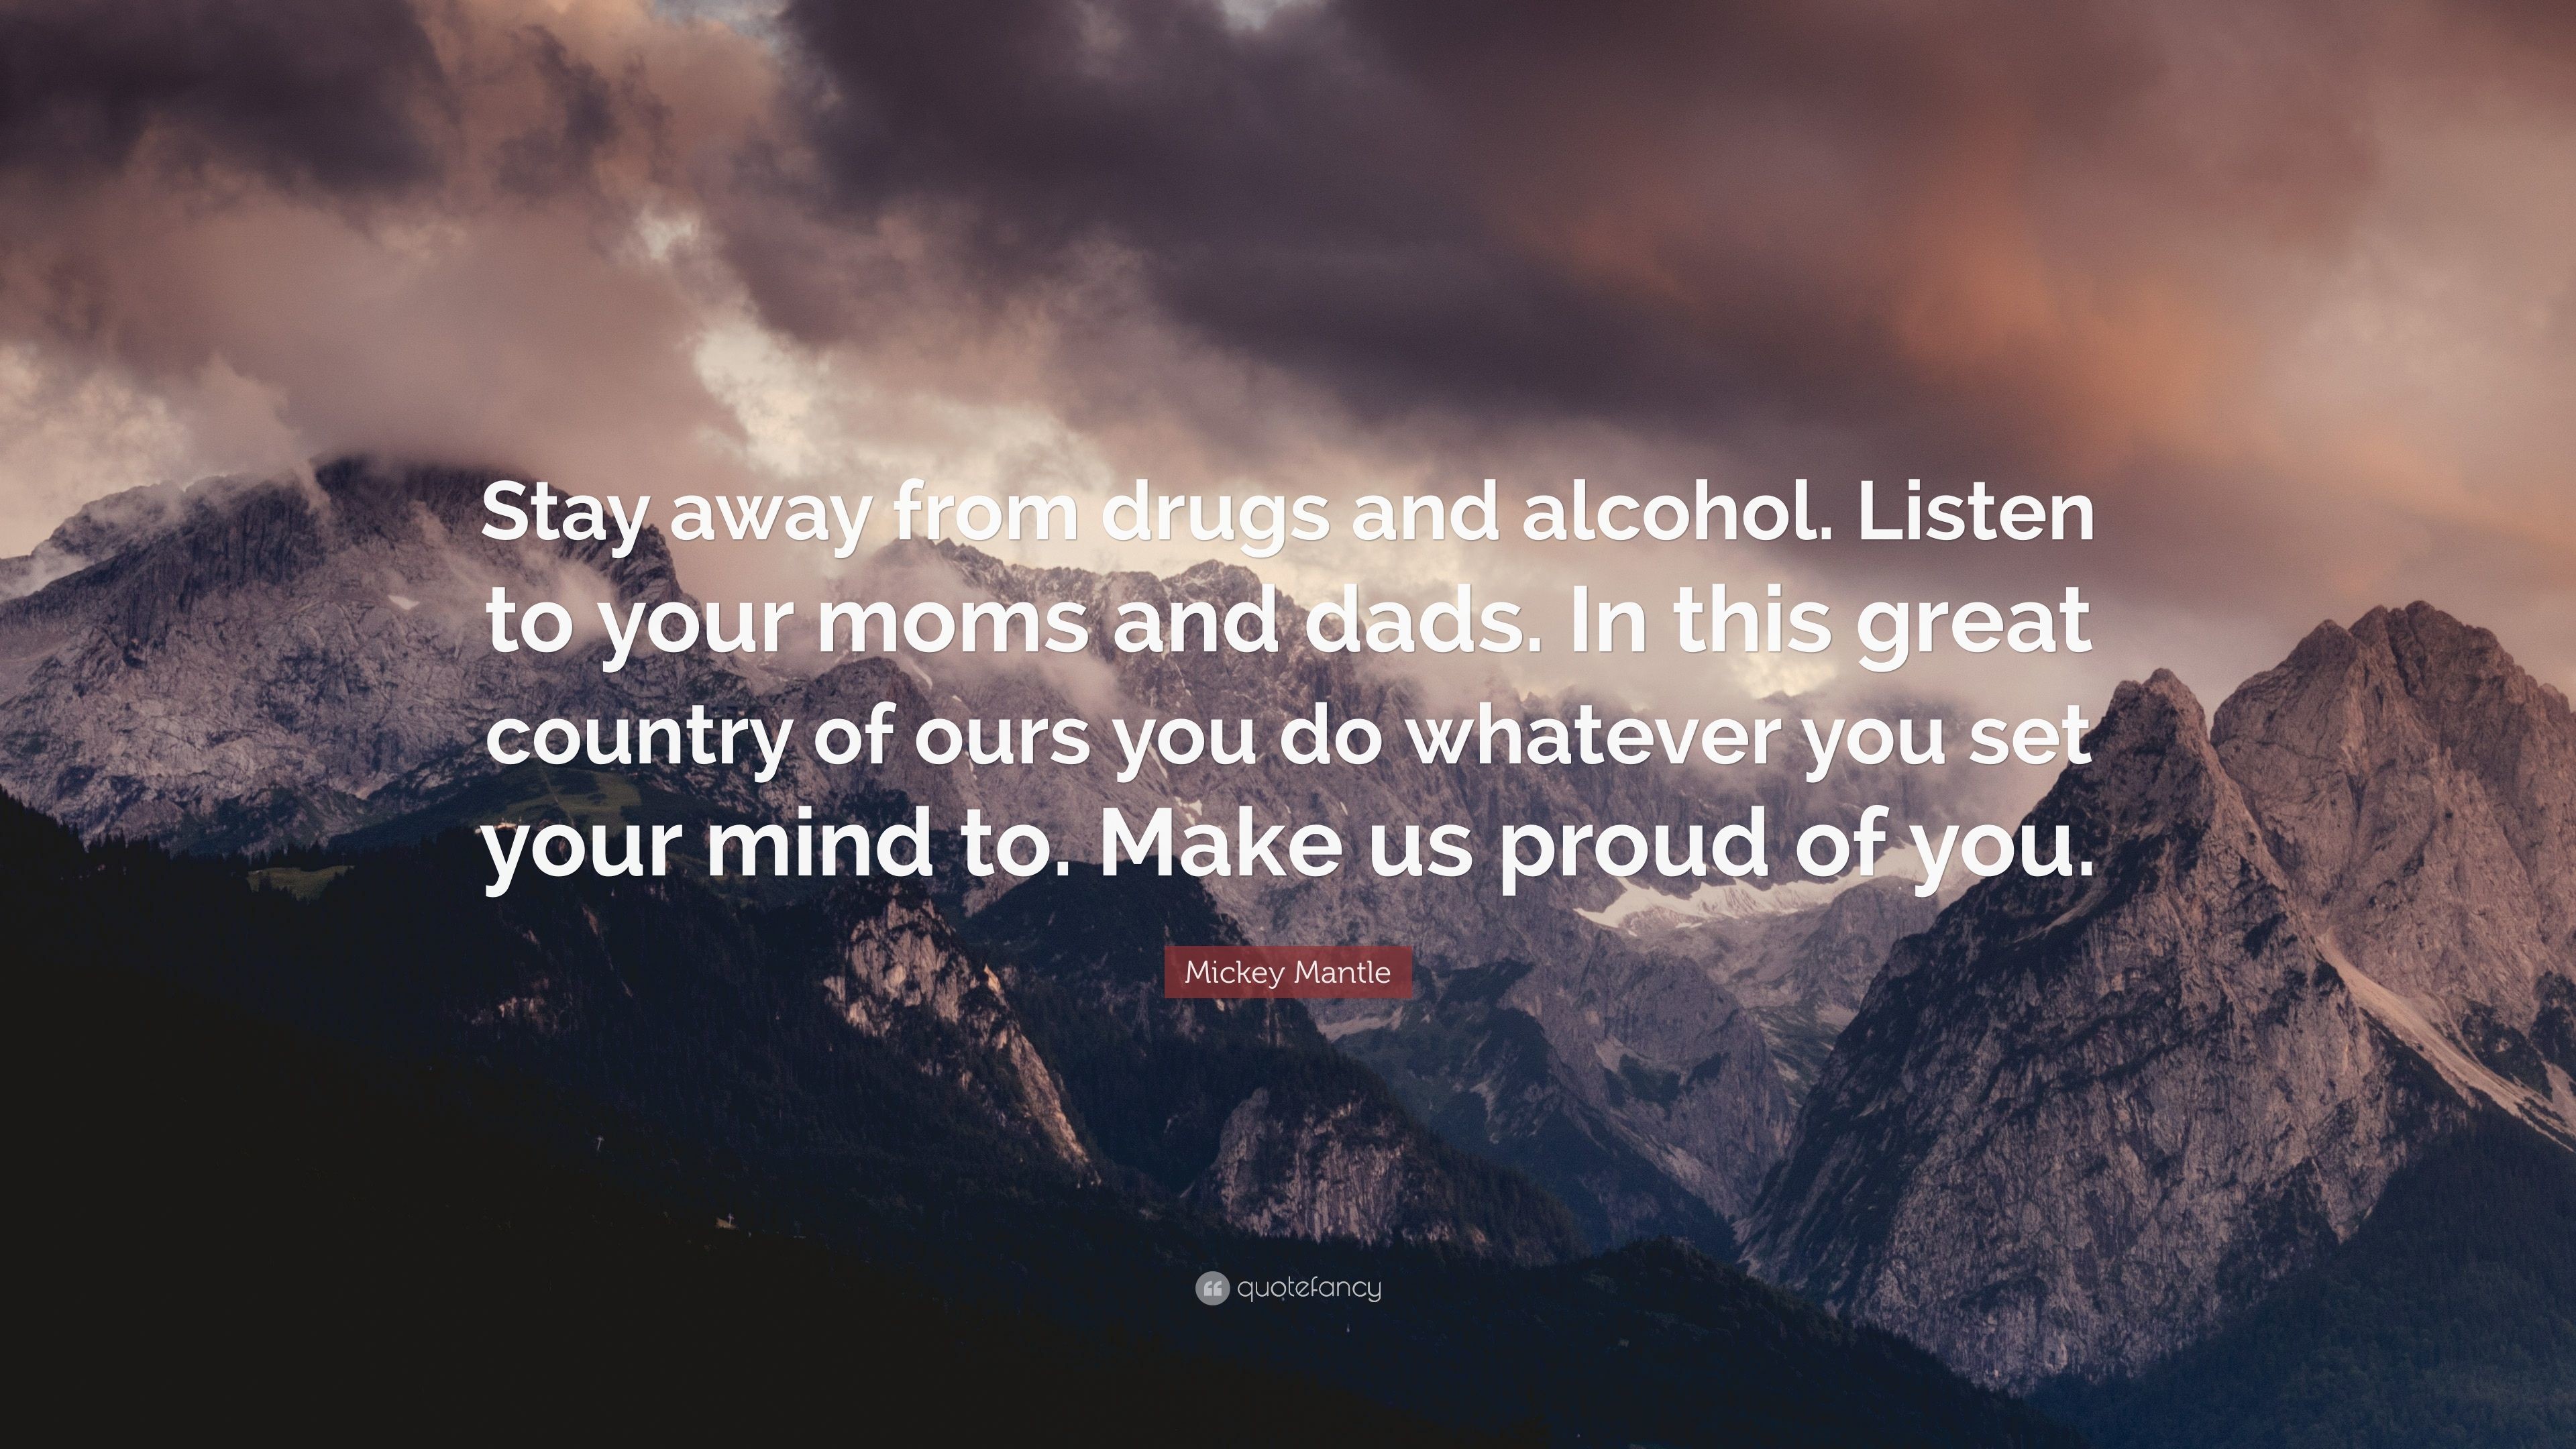 3840x2160 Mickey Mantle Quote: “Stay away from drugs and alcohol. Listen to your moms